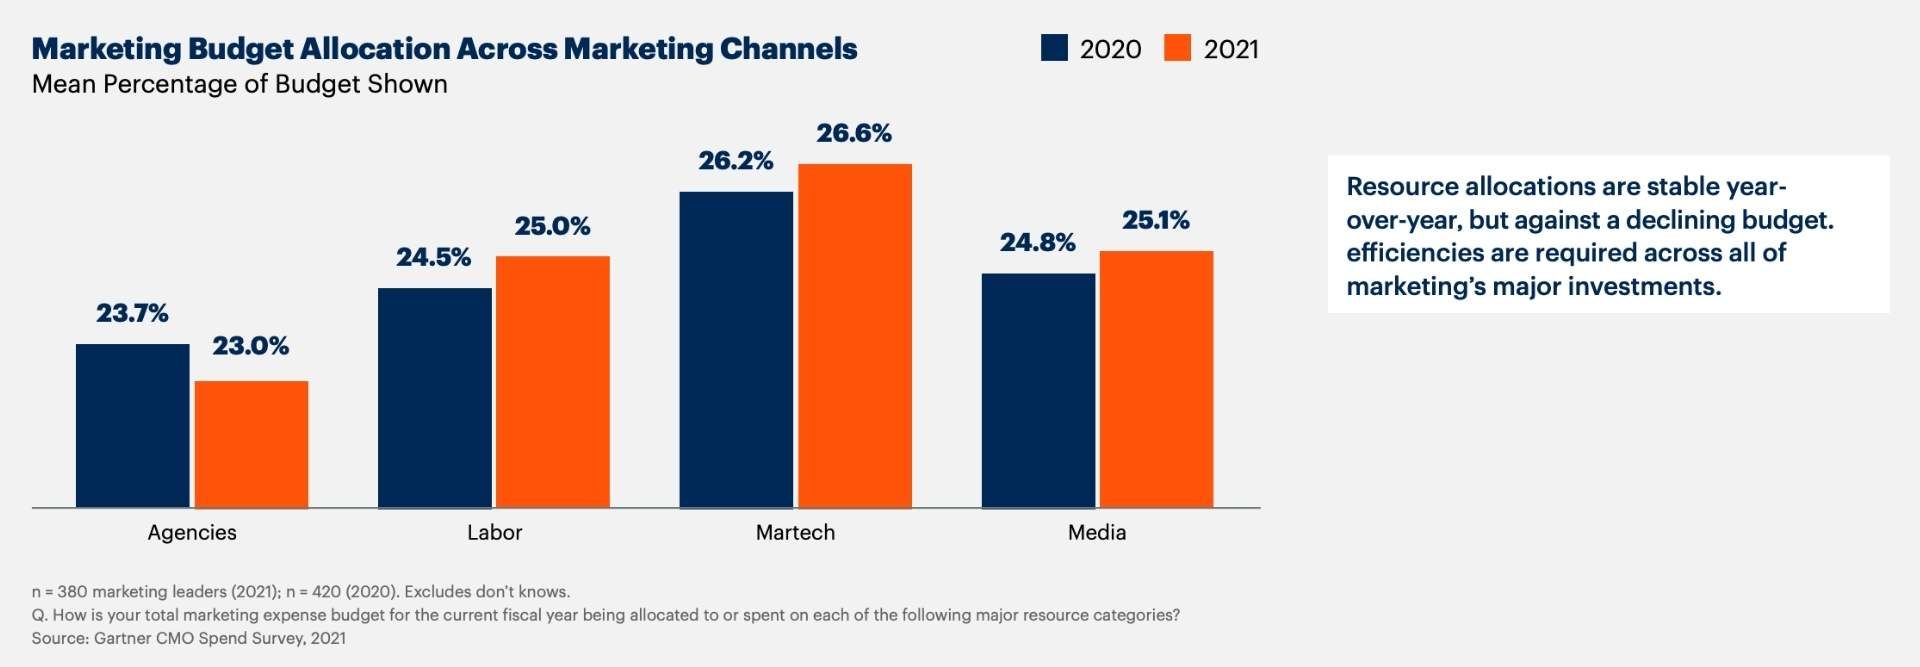 Martech and media budgets